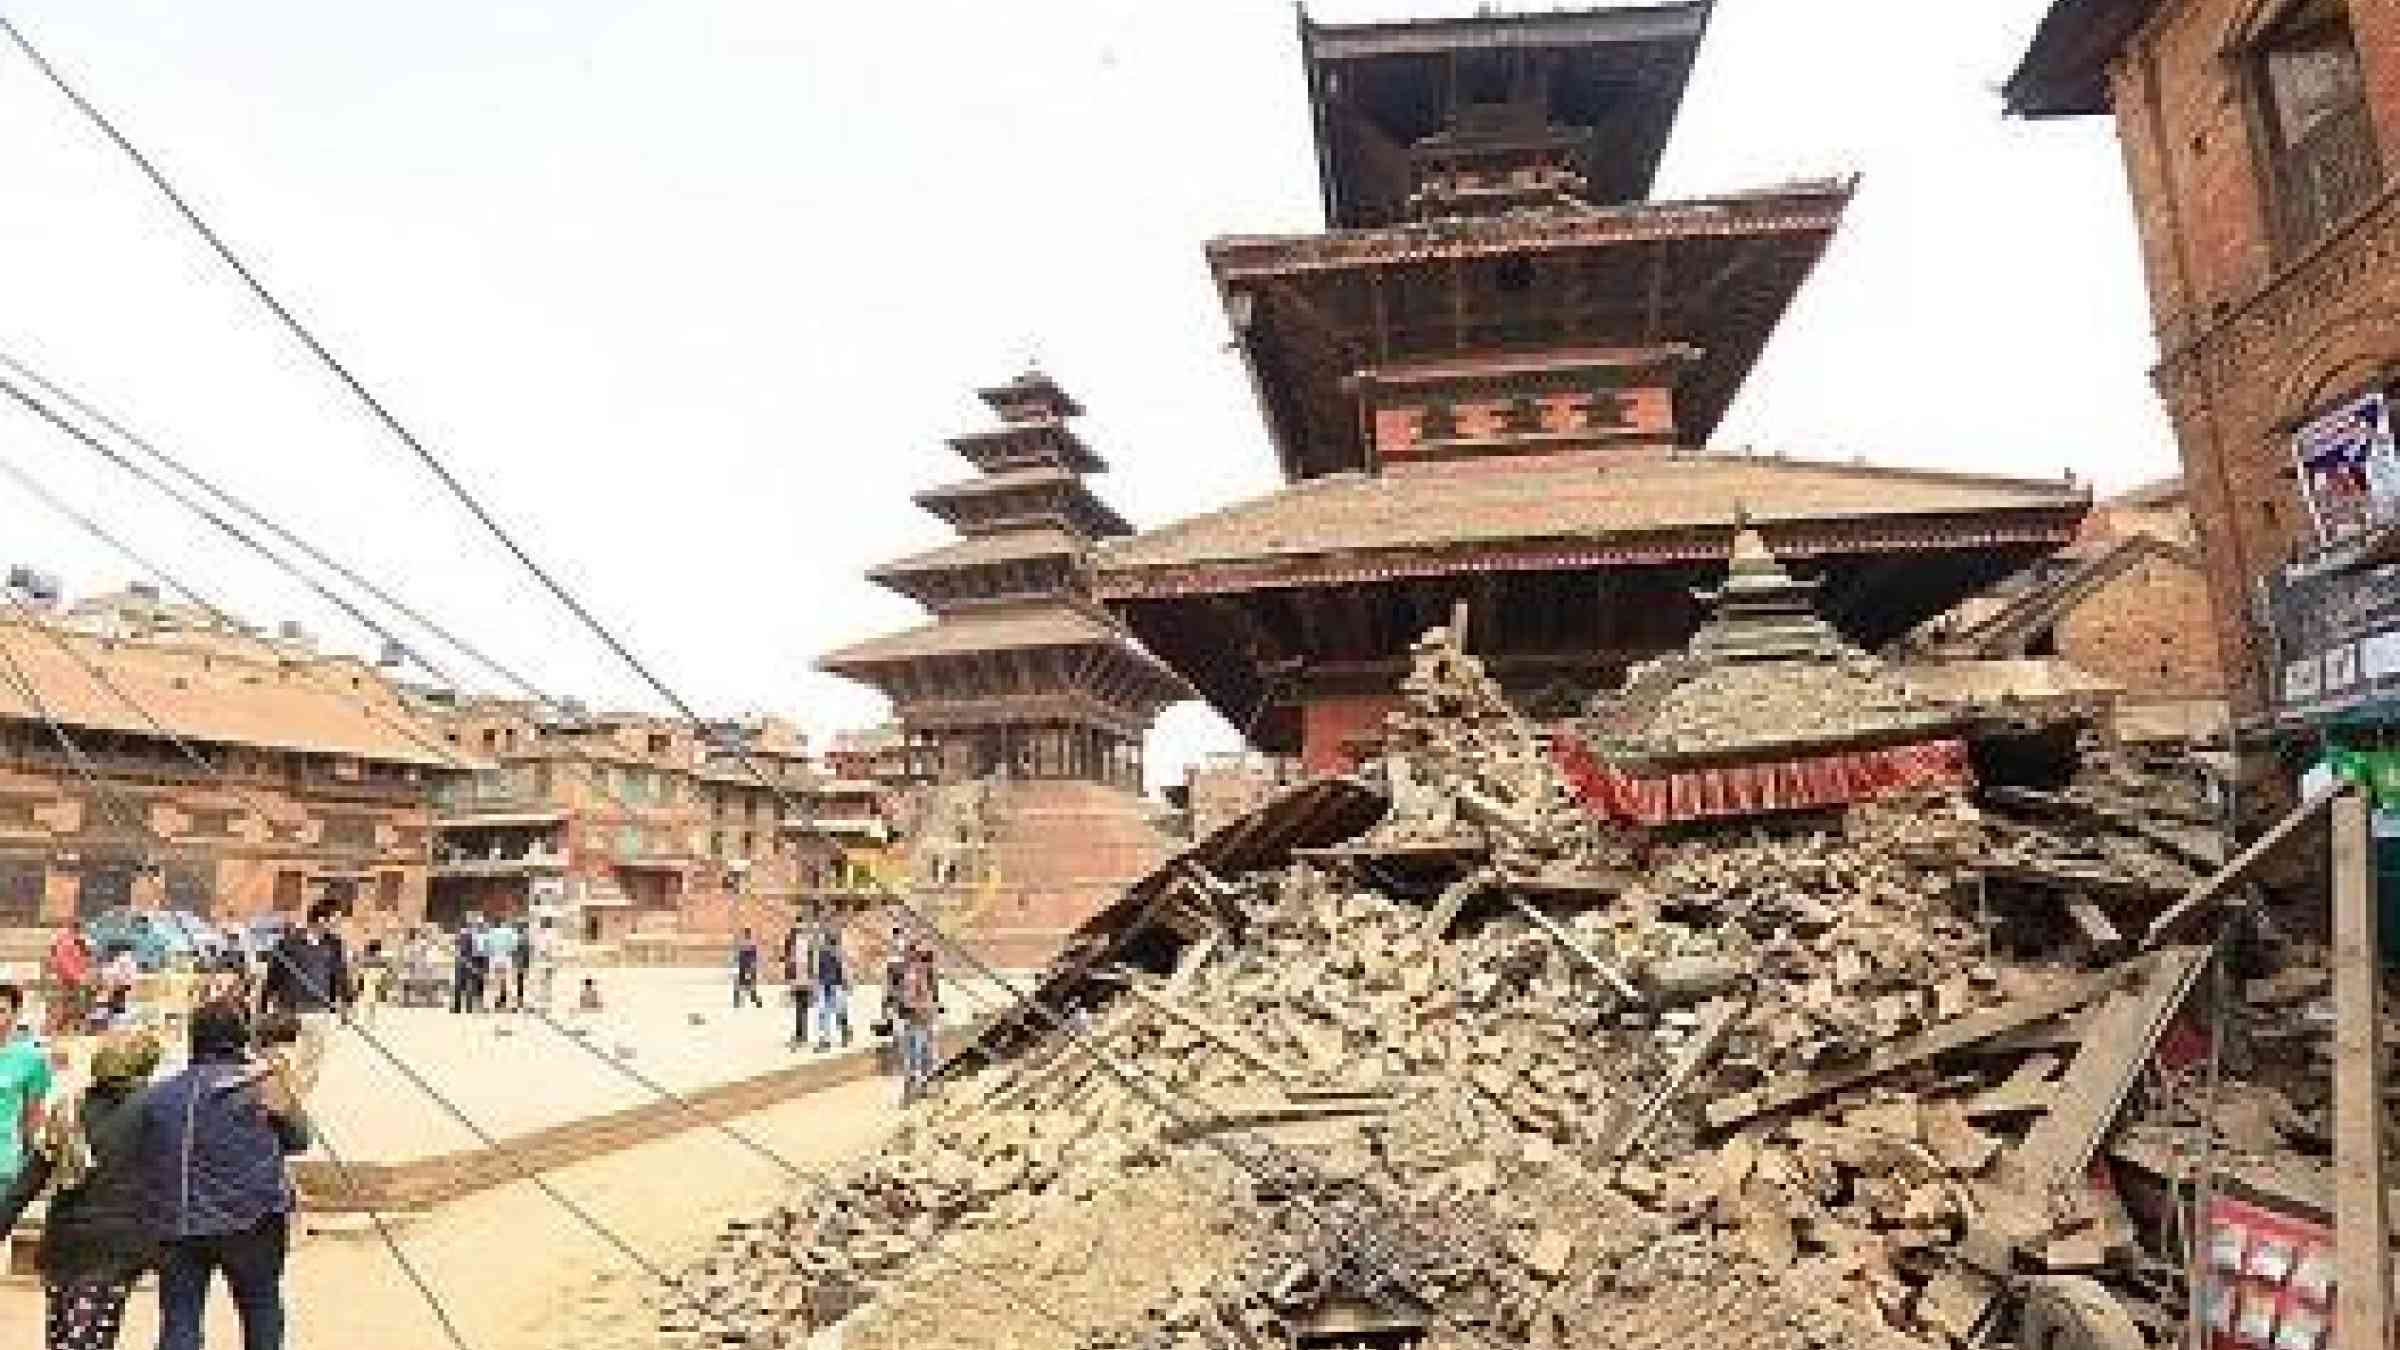 Several cultural heritage sites were damaged or destroyed in the 2015 earthquake in Nepal (Photo: UNDP)